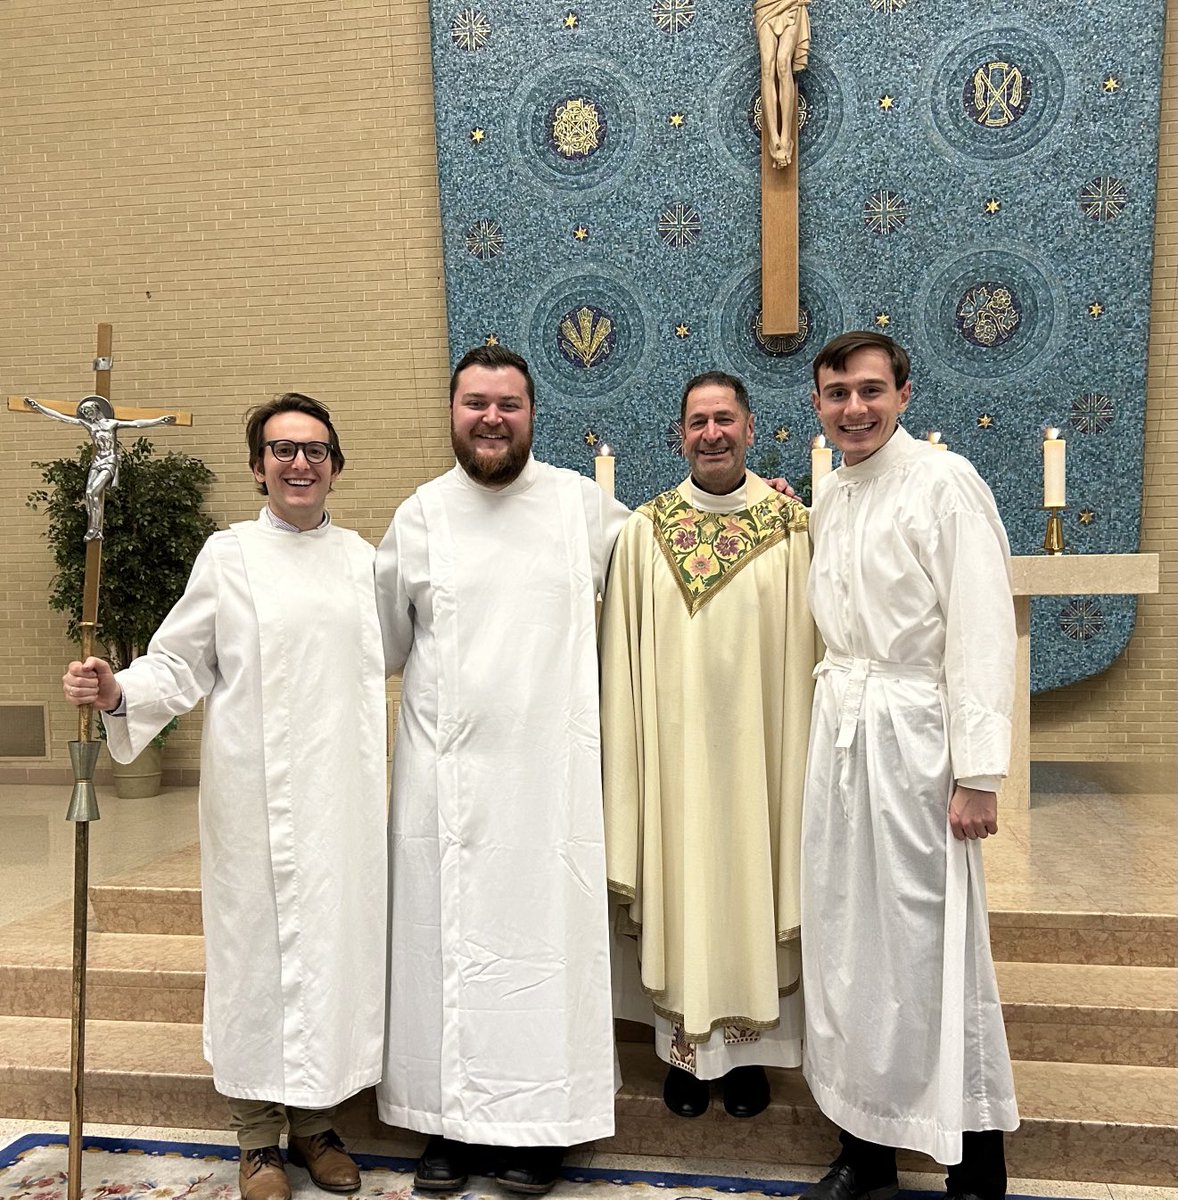 A blessed Easter Vigil at Colombiere Center with our men in health care and novices serving. ⁦@MidwestJesuits⁩